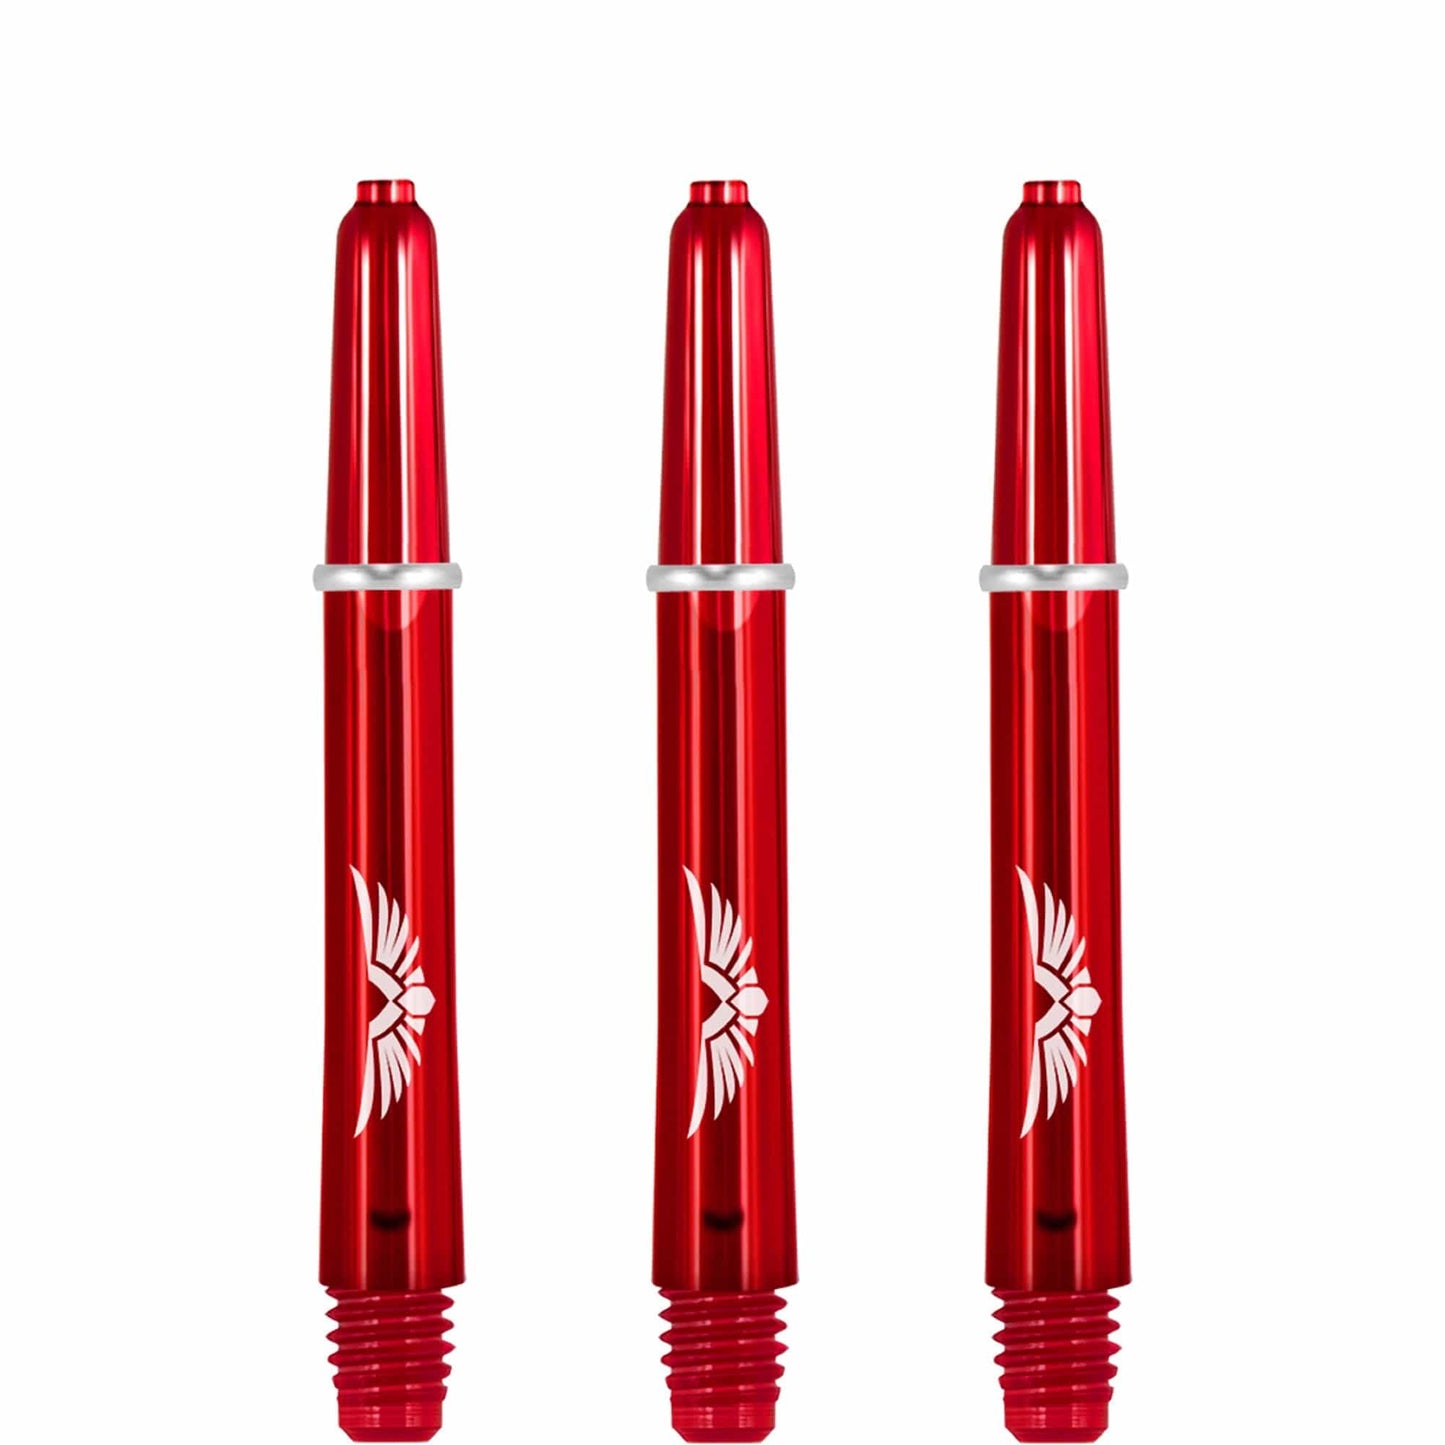 Shot Eagle Claw Dart Shafts - with Machined Rings - Strong Polycarbonate Stems - Red Tweenie